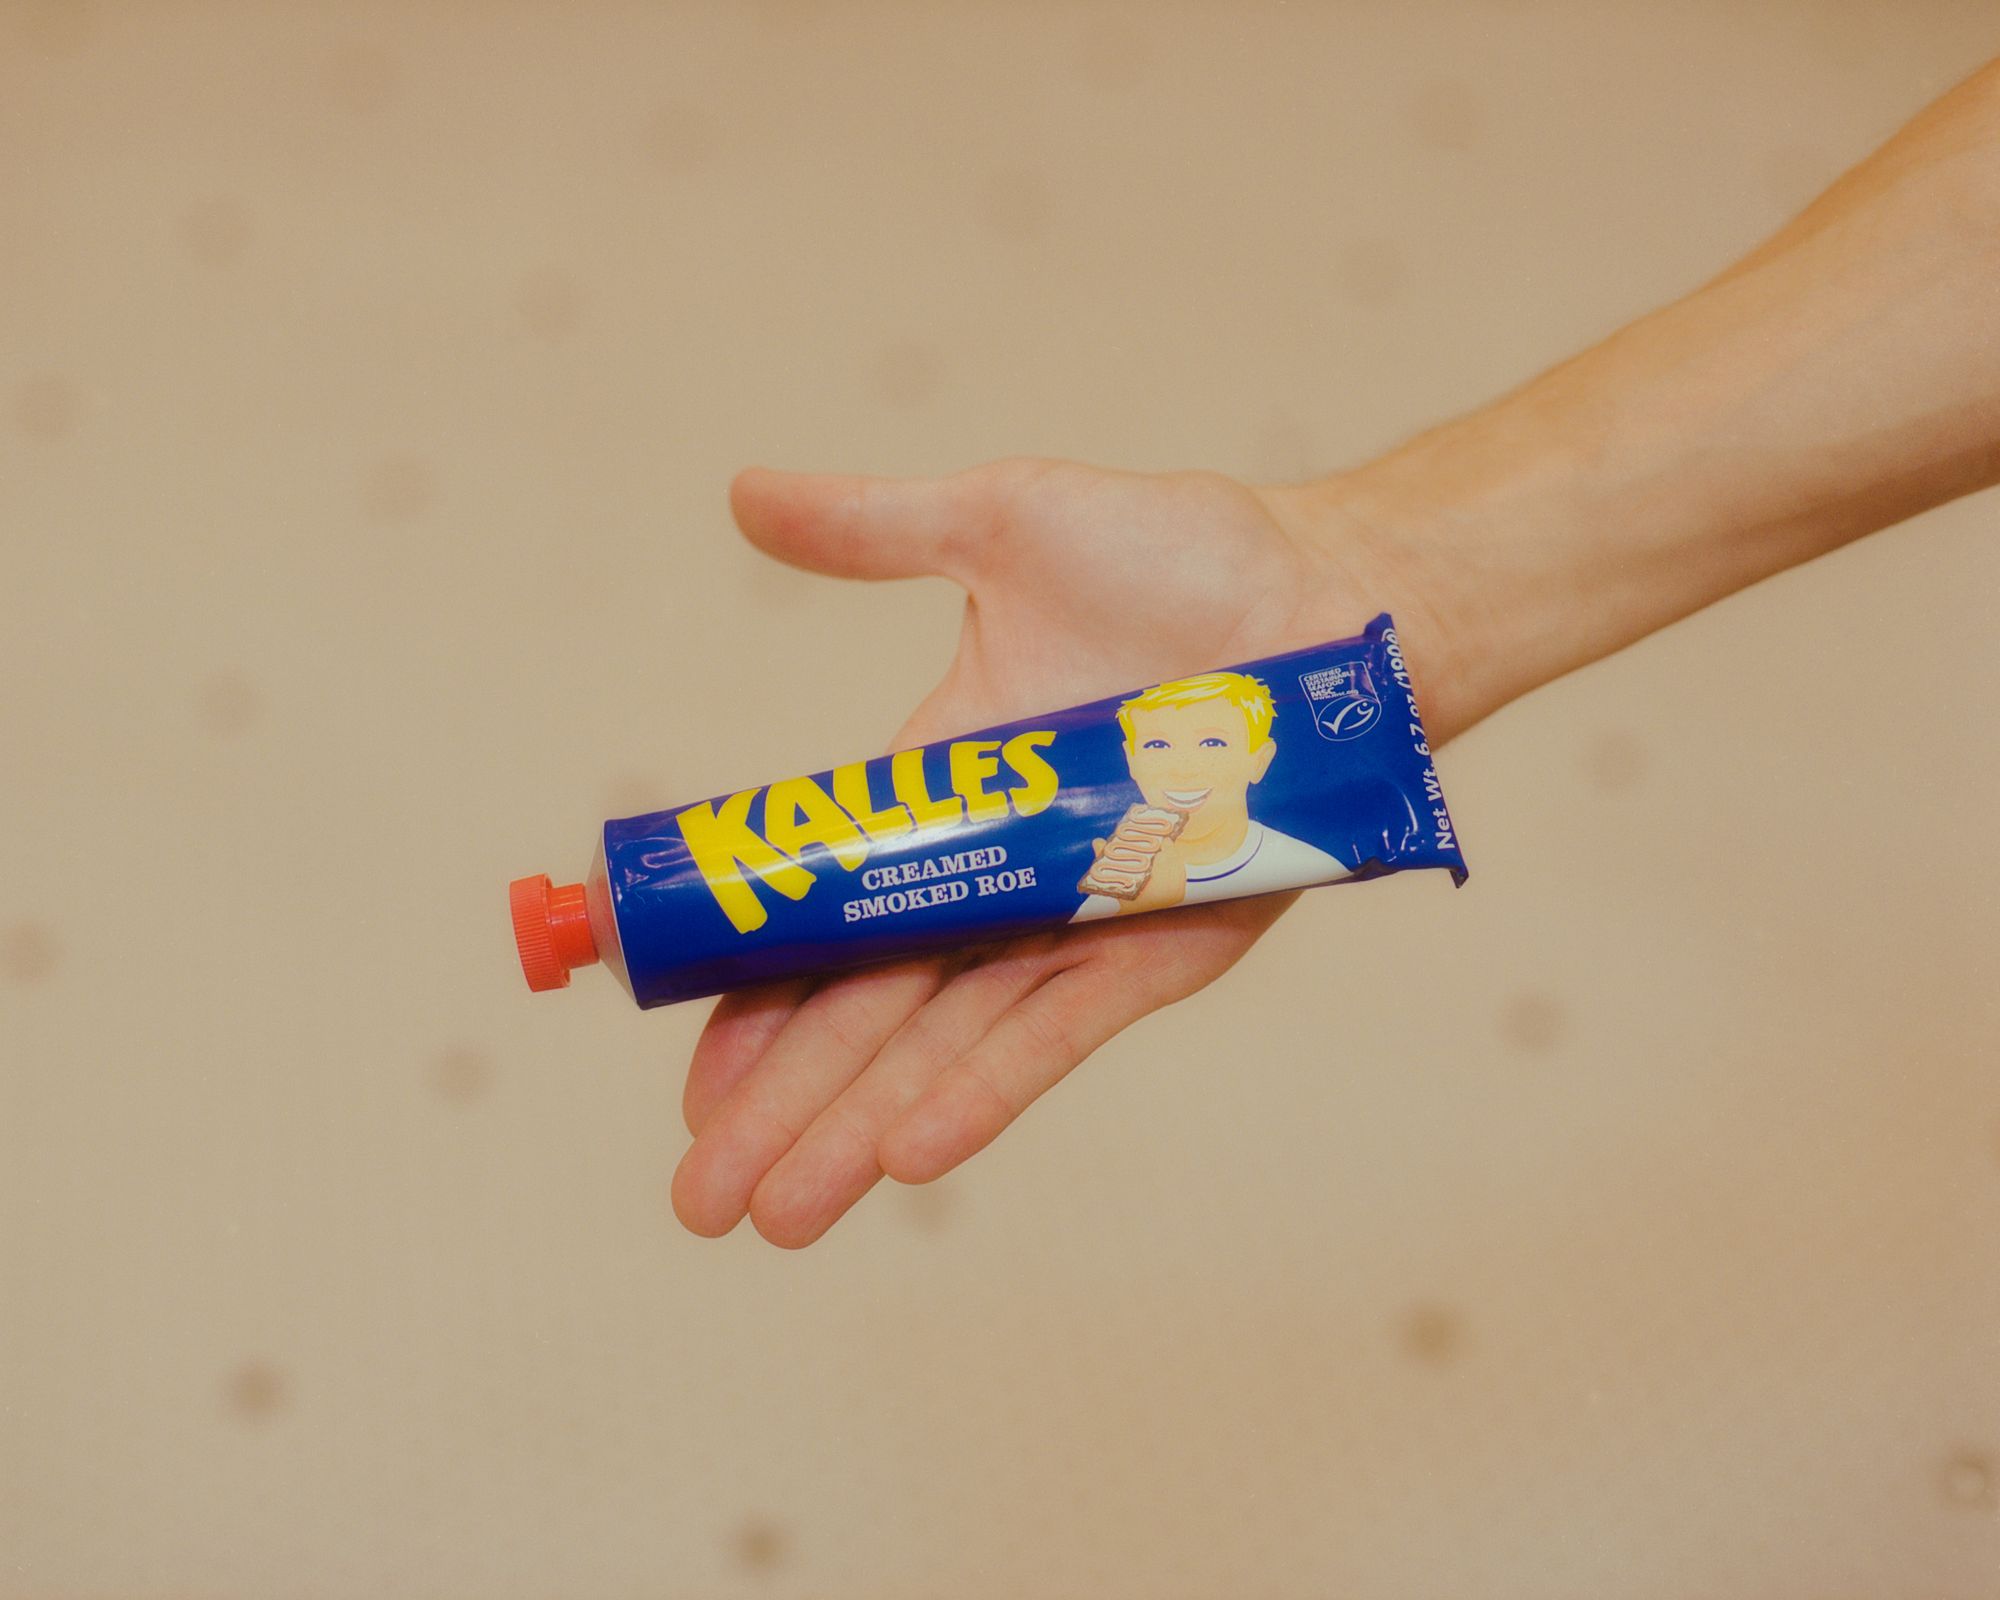 A tube of Kalles in a hand